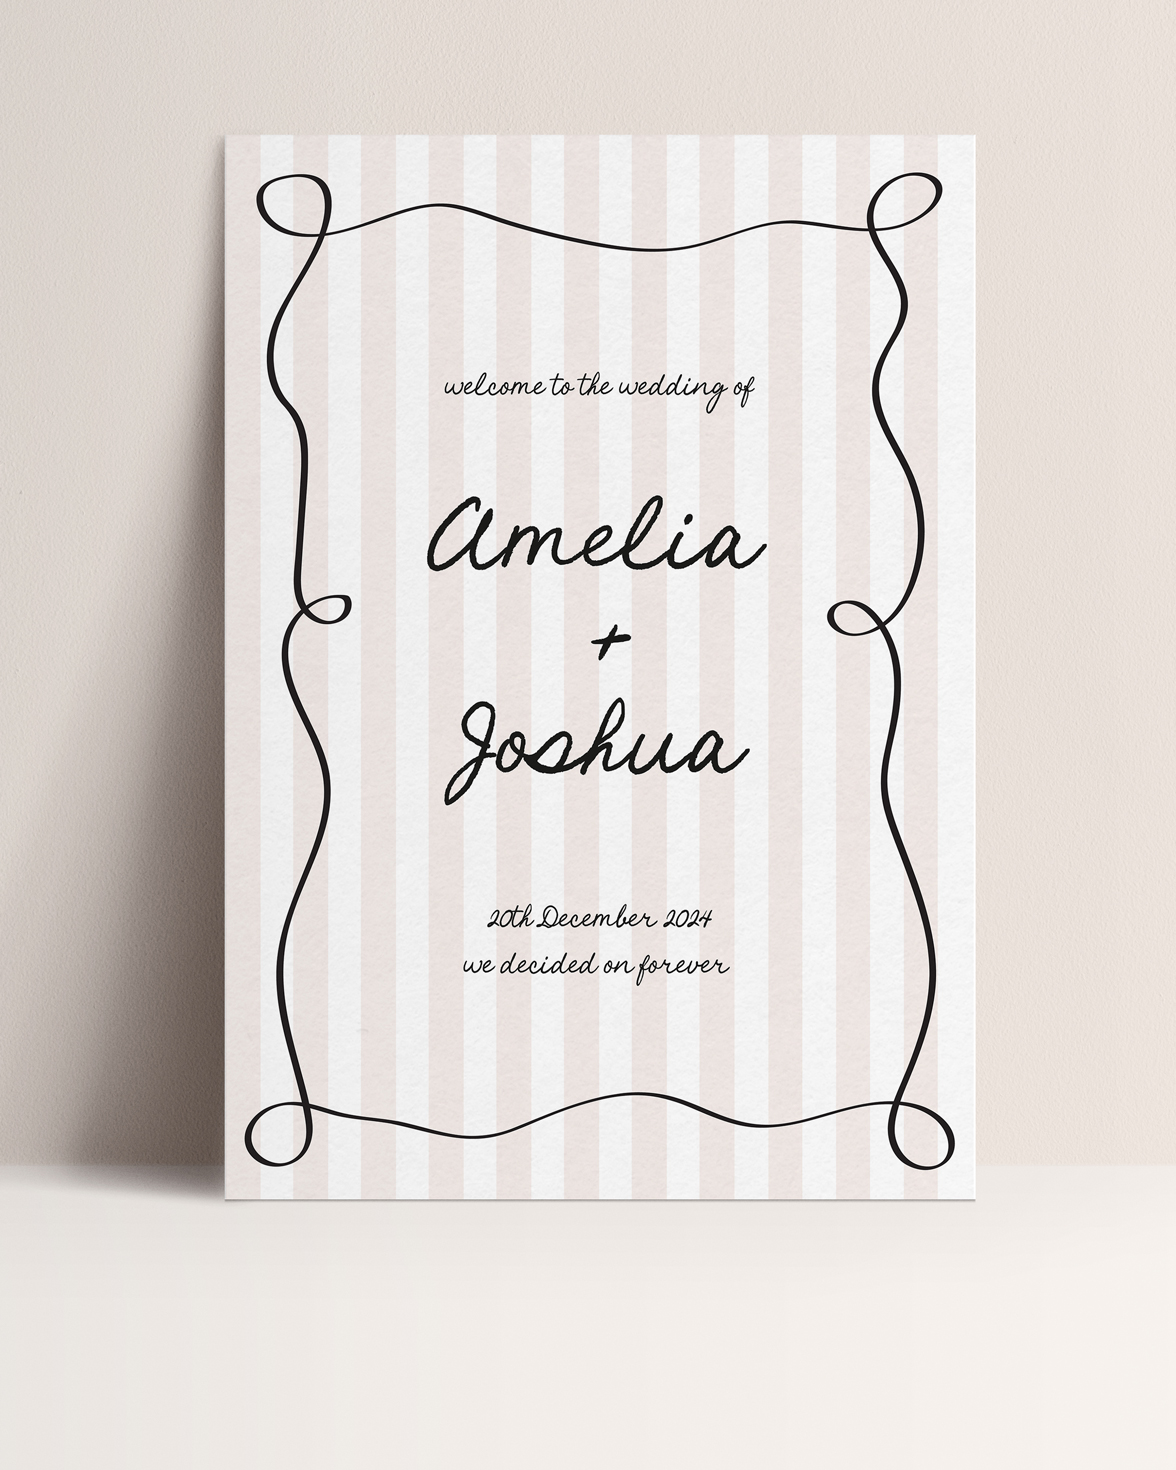 Tonal stripe wedding welcome sign with squiggly hand drawn border